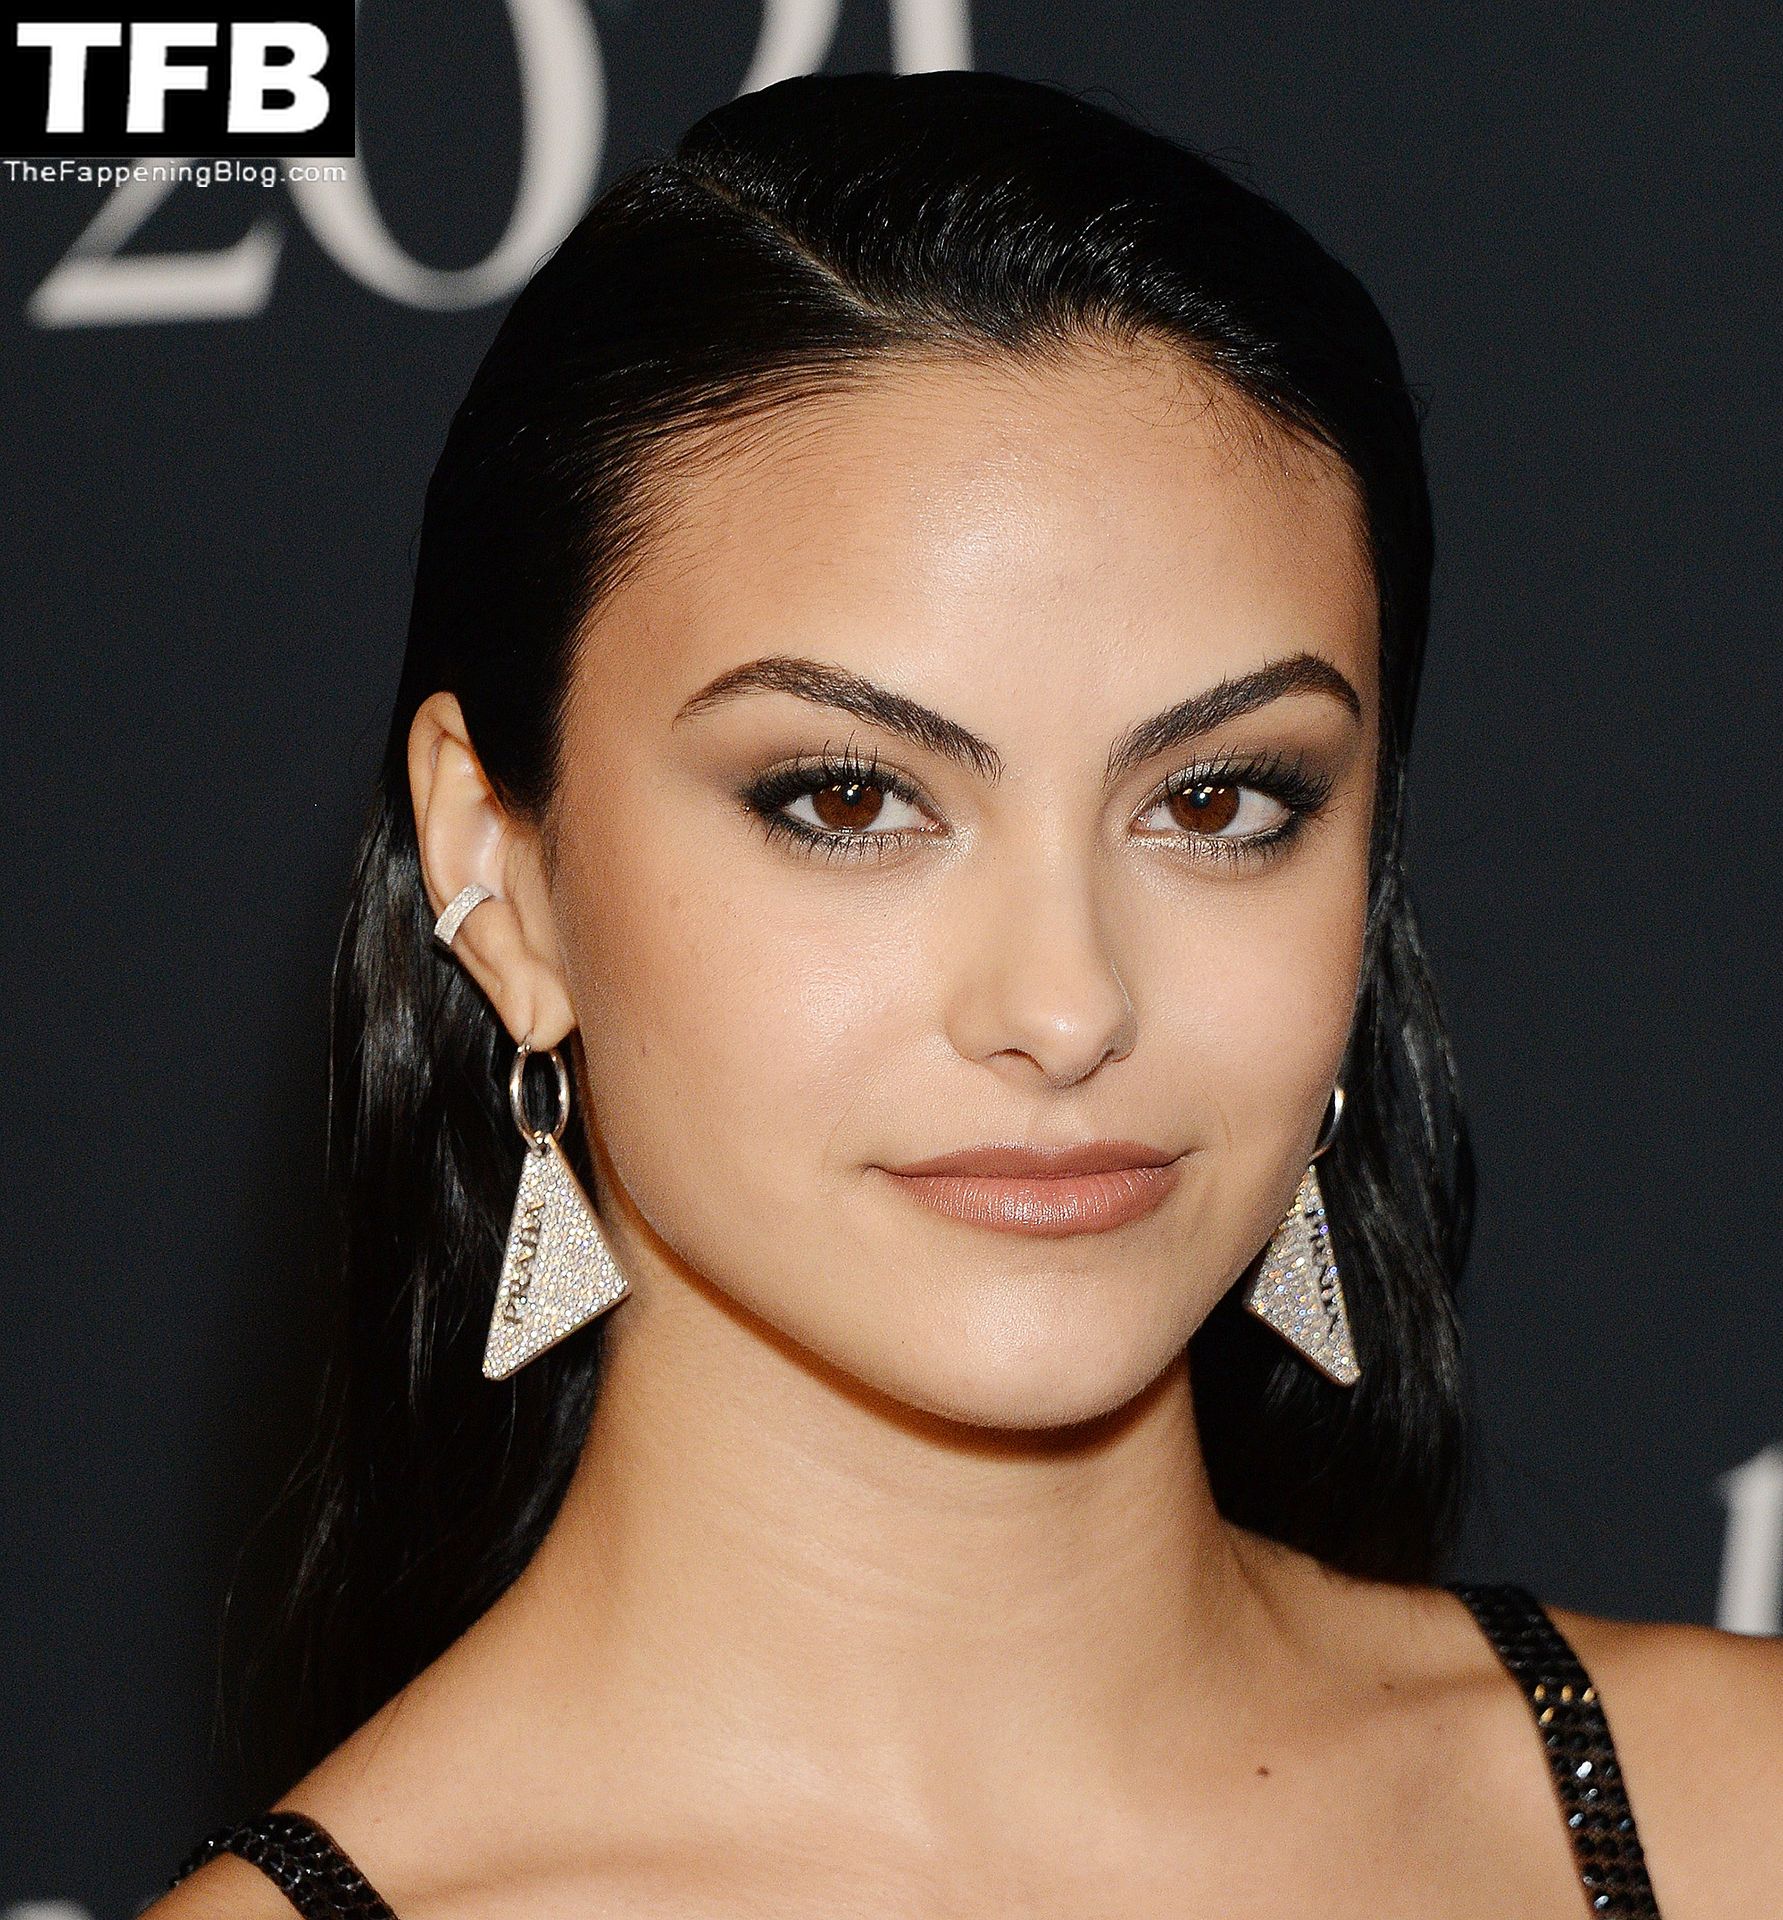 Camila-Mendes-See-Through-Tits-The-Fappening-Blog-53.jpg